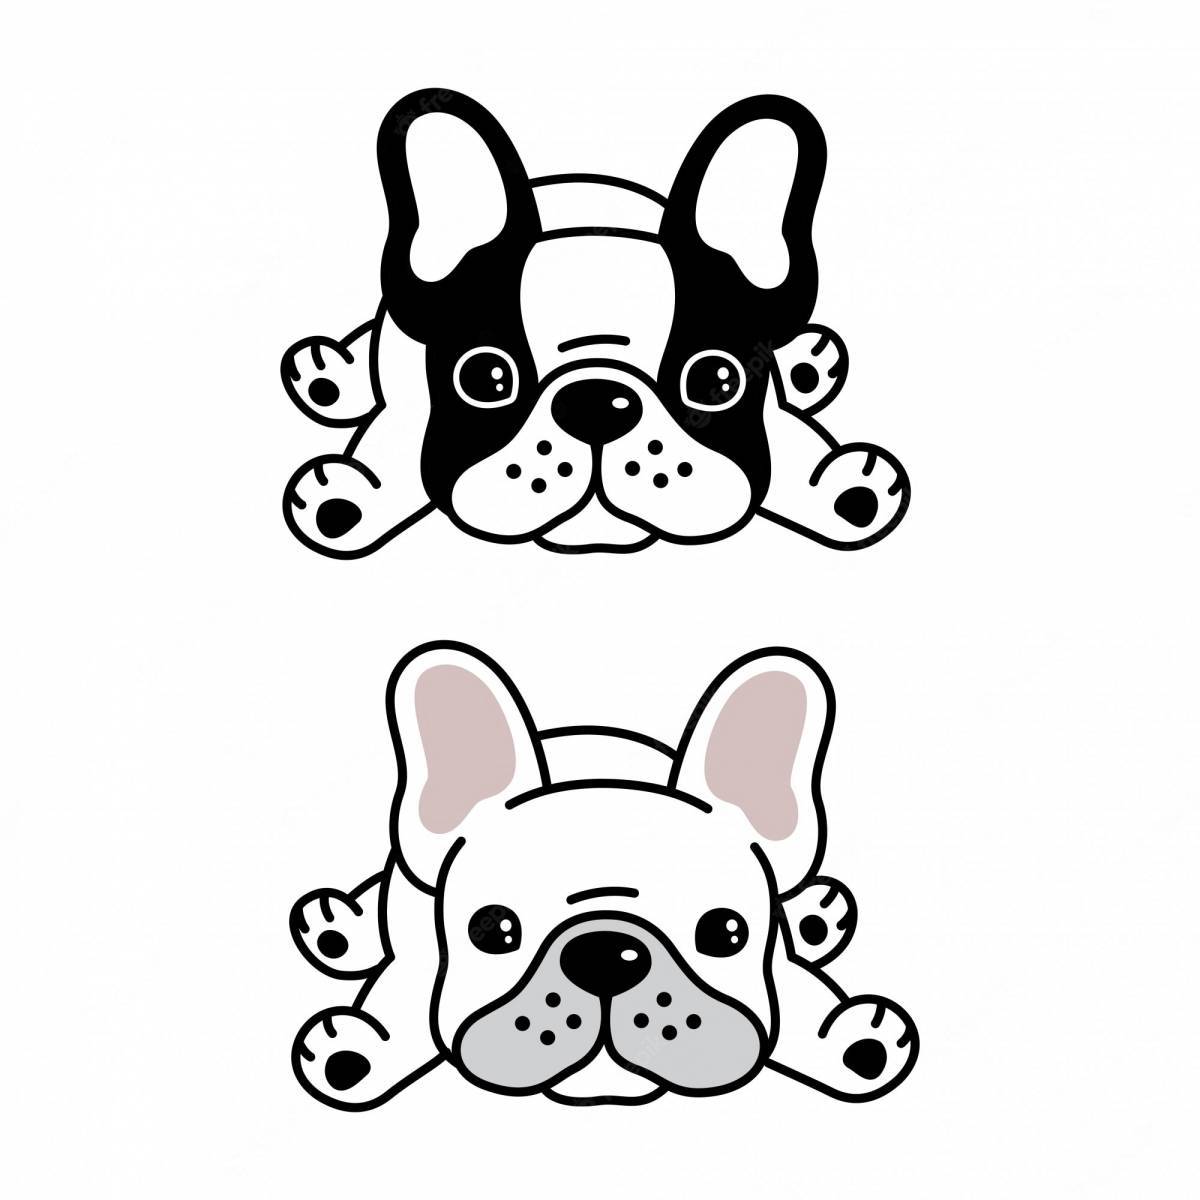 Coloring page calm french bulldog